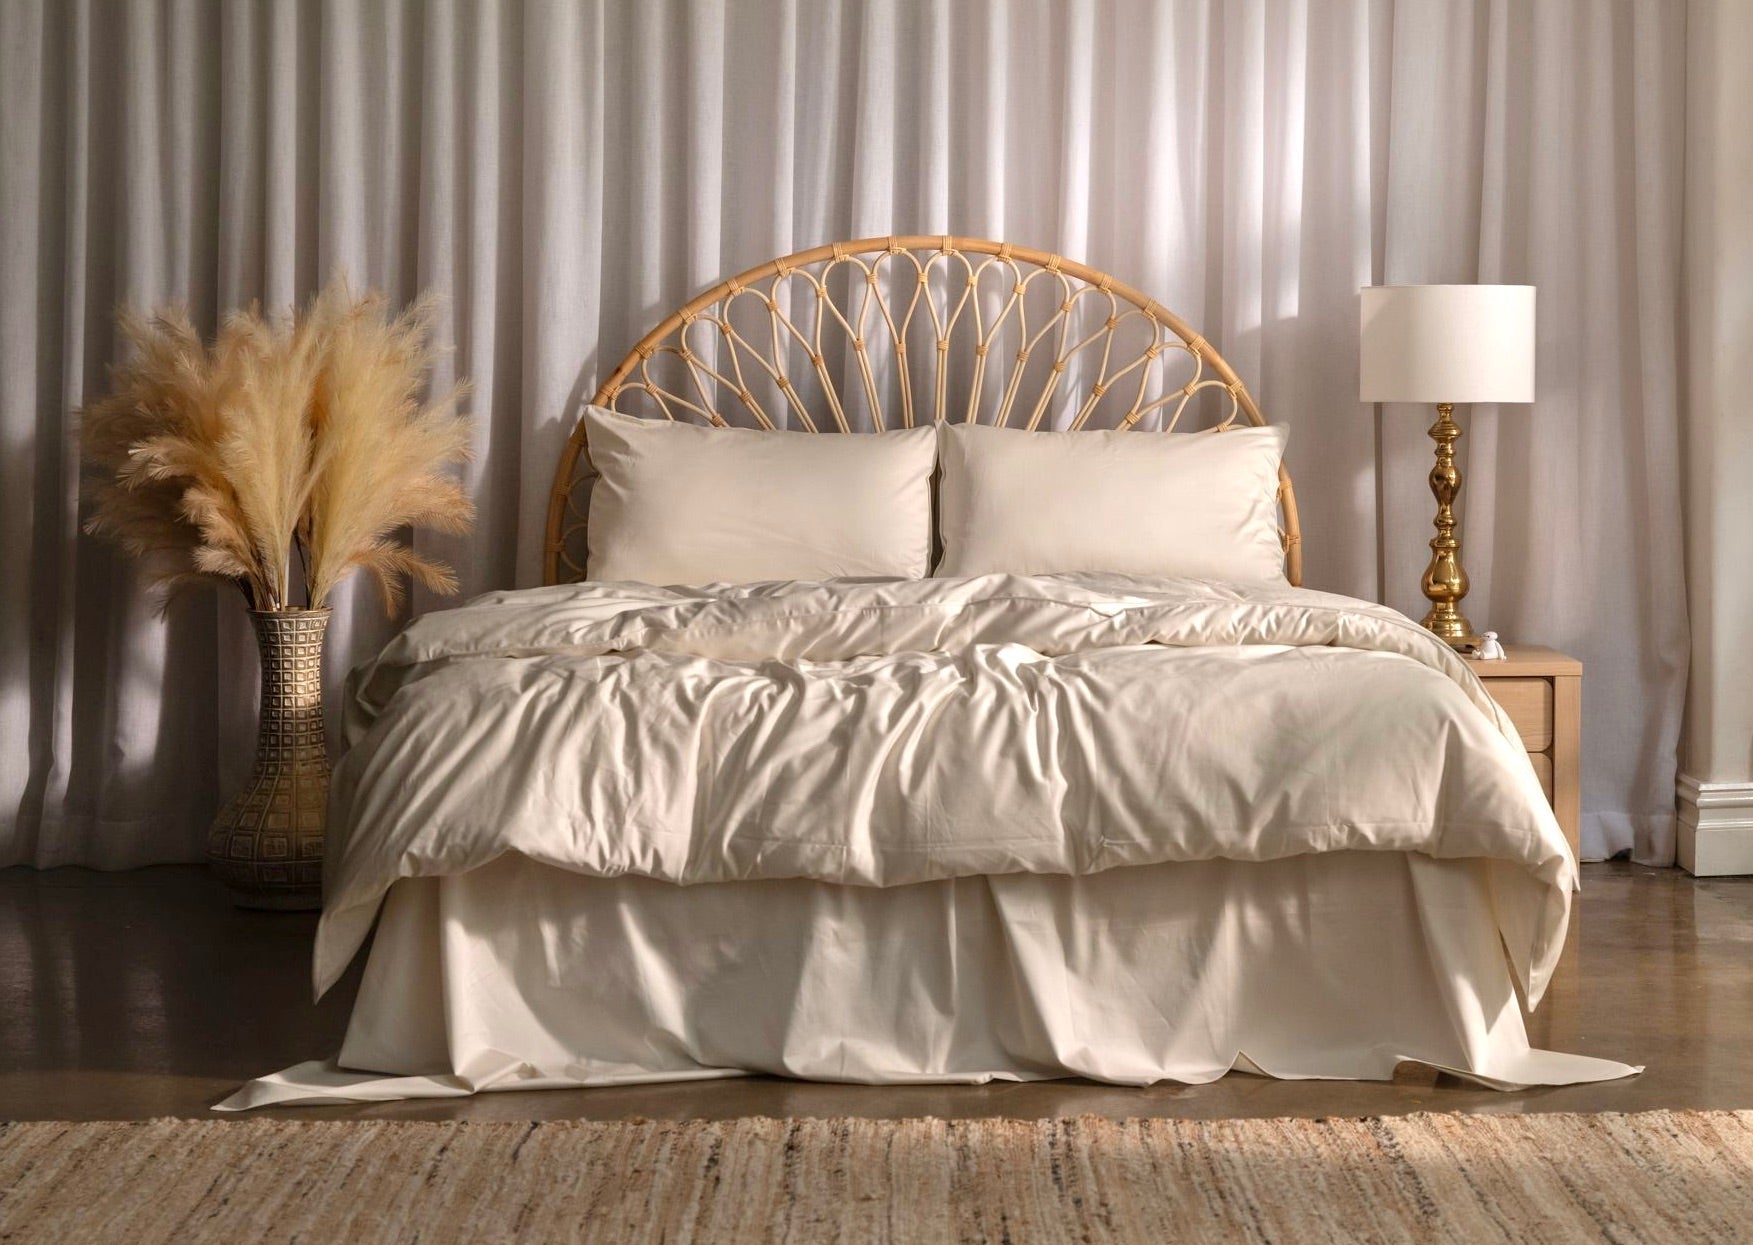 Beddie's Cloud Bed sheets, pillowcases and quilt covers. A beautiful tone of creamy white with a pale yellow undertone. Pantone Cloud Dancer. Best cotton sheets, best cotton pillowcases, best cotton quilt covers in Australia. 